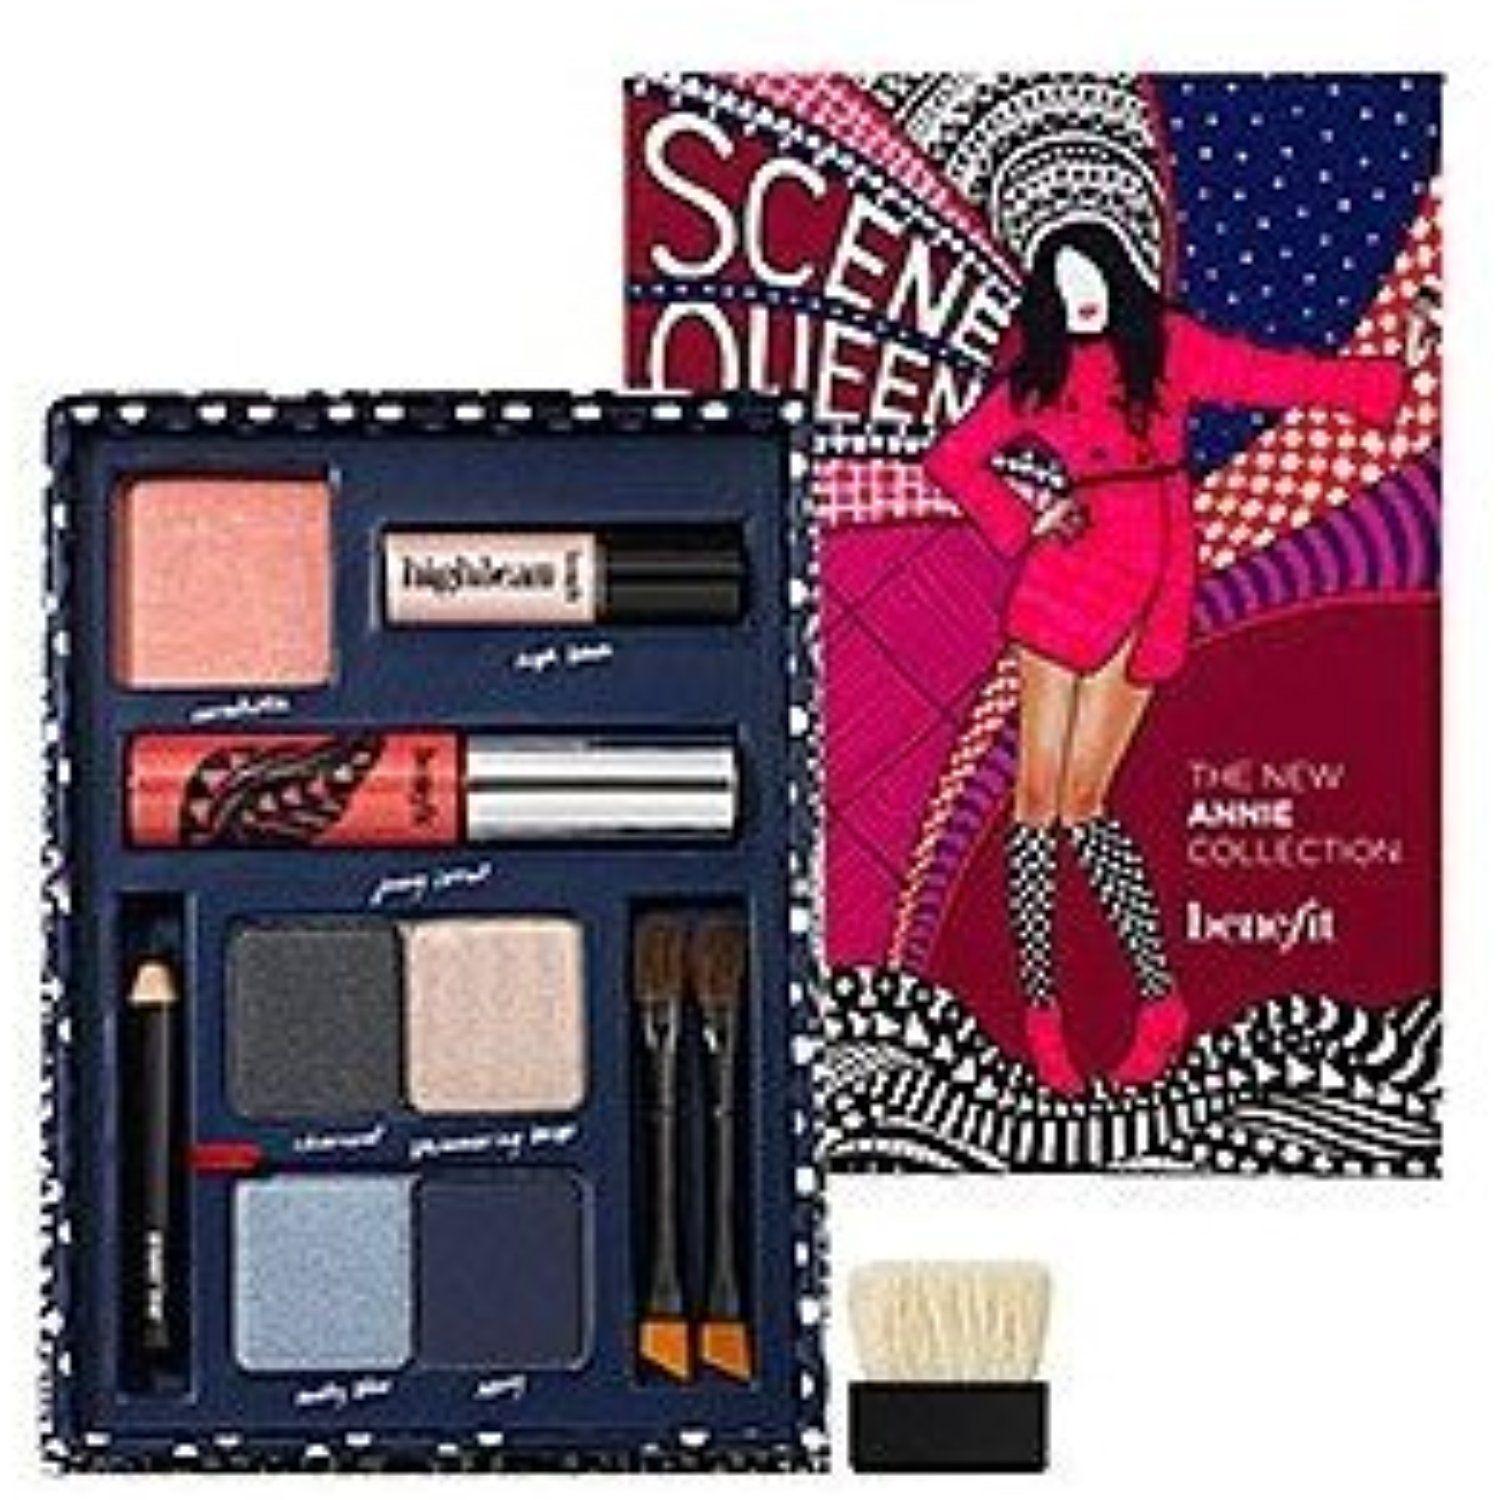 Benefit Scene Queen The New Annie Collection (without highbeam and lipgloss)